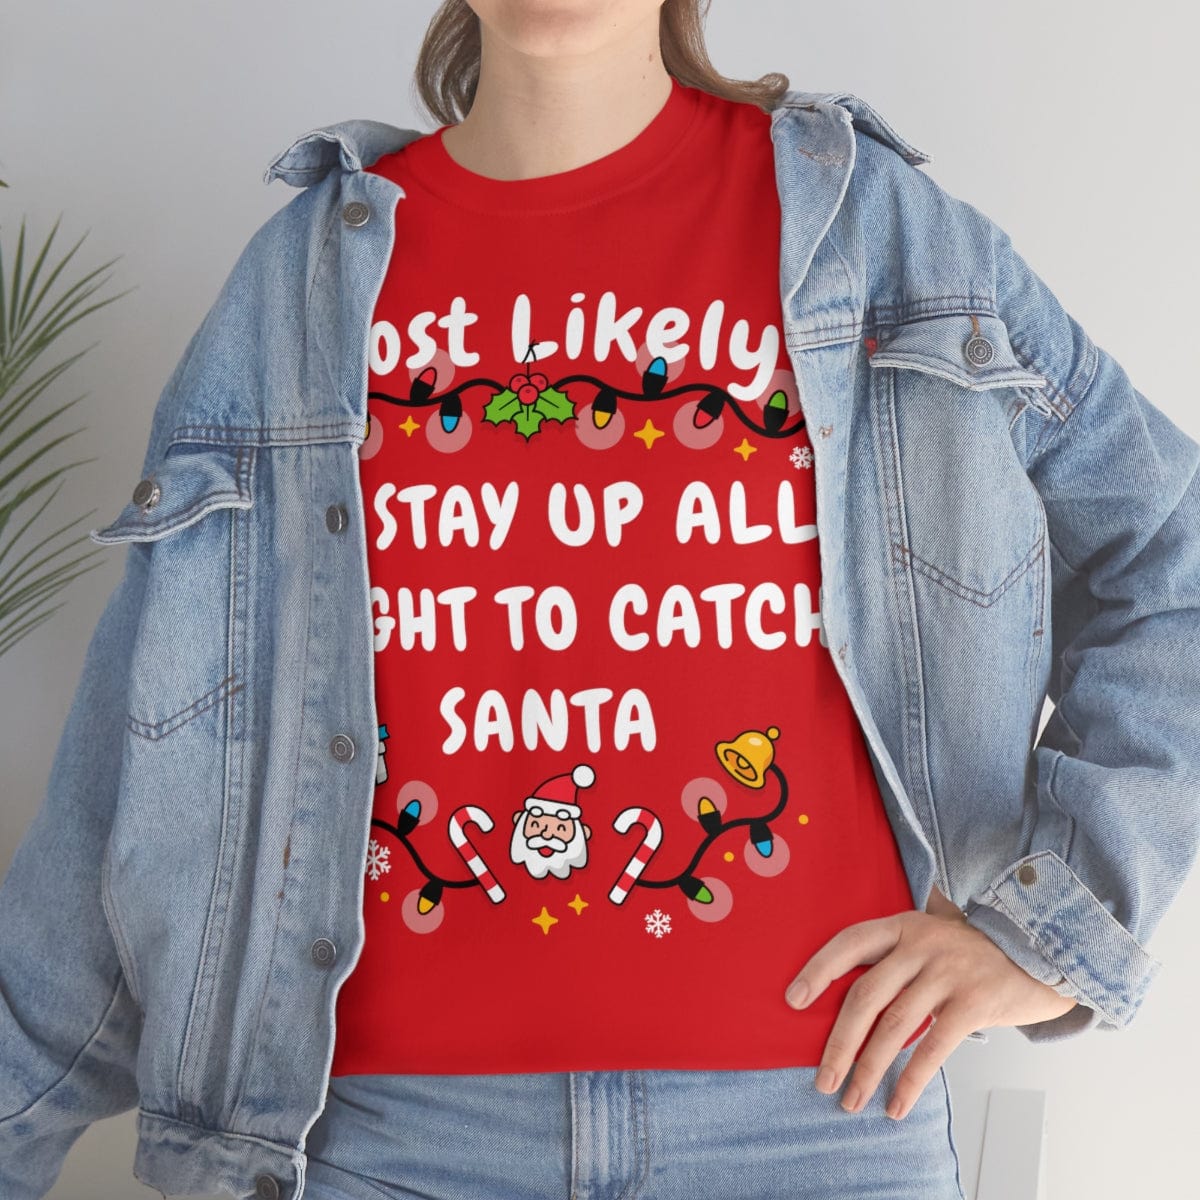 TO STAY UP ALL NIGHT TO CATCH SANTA